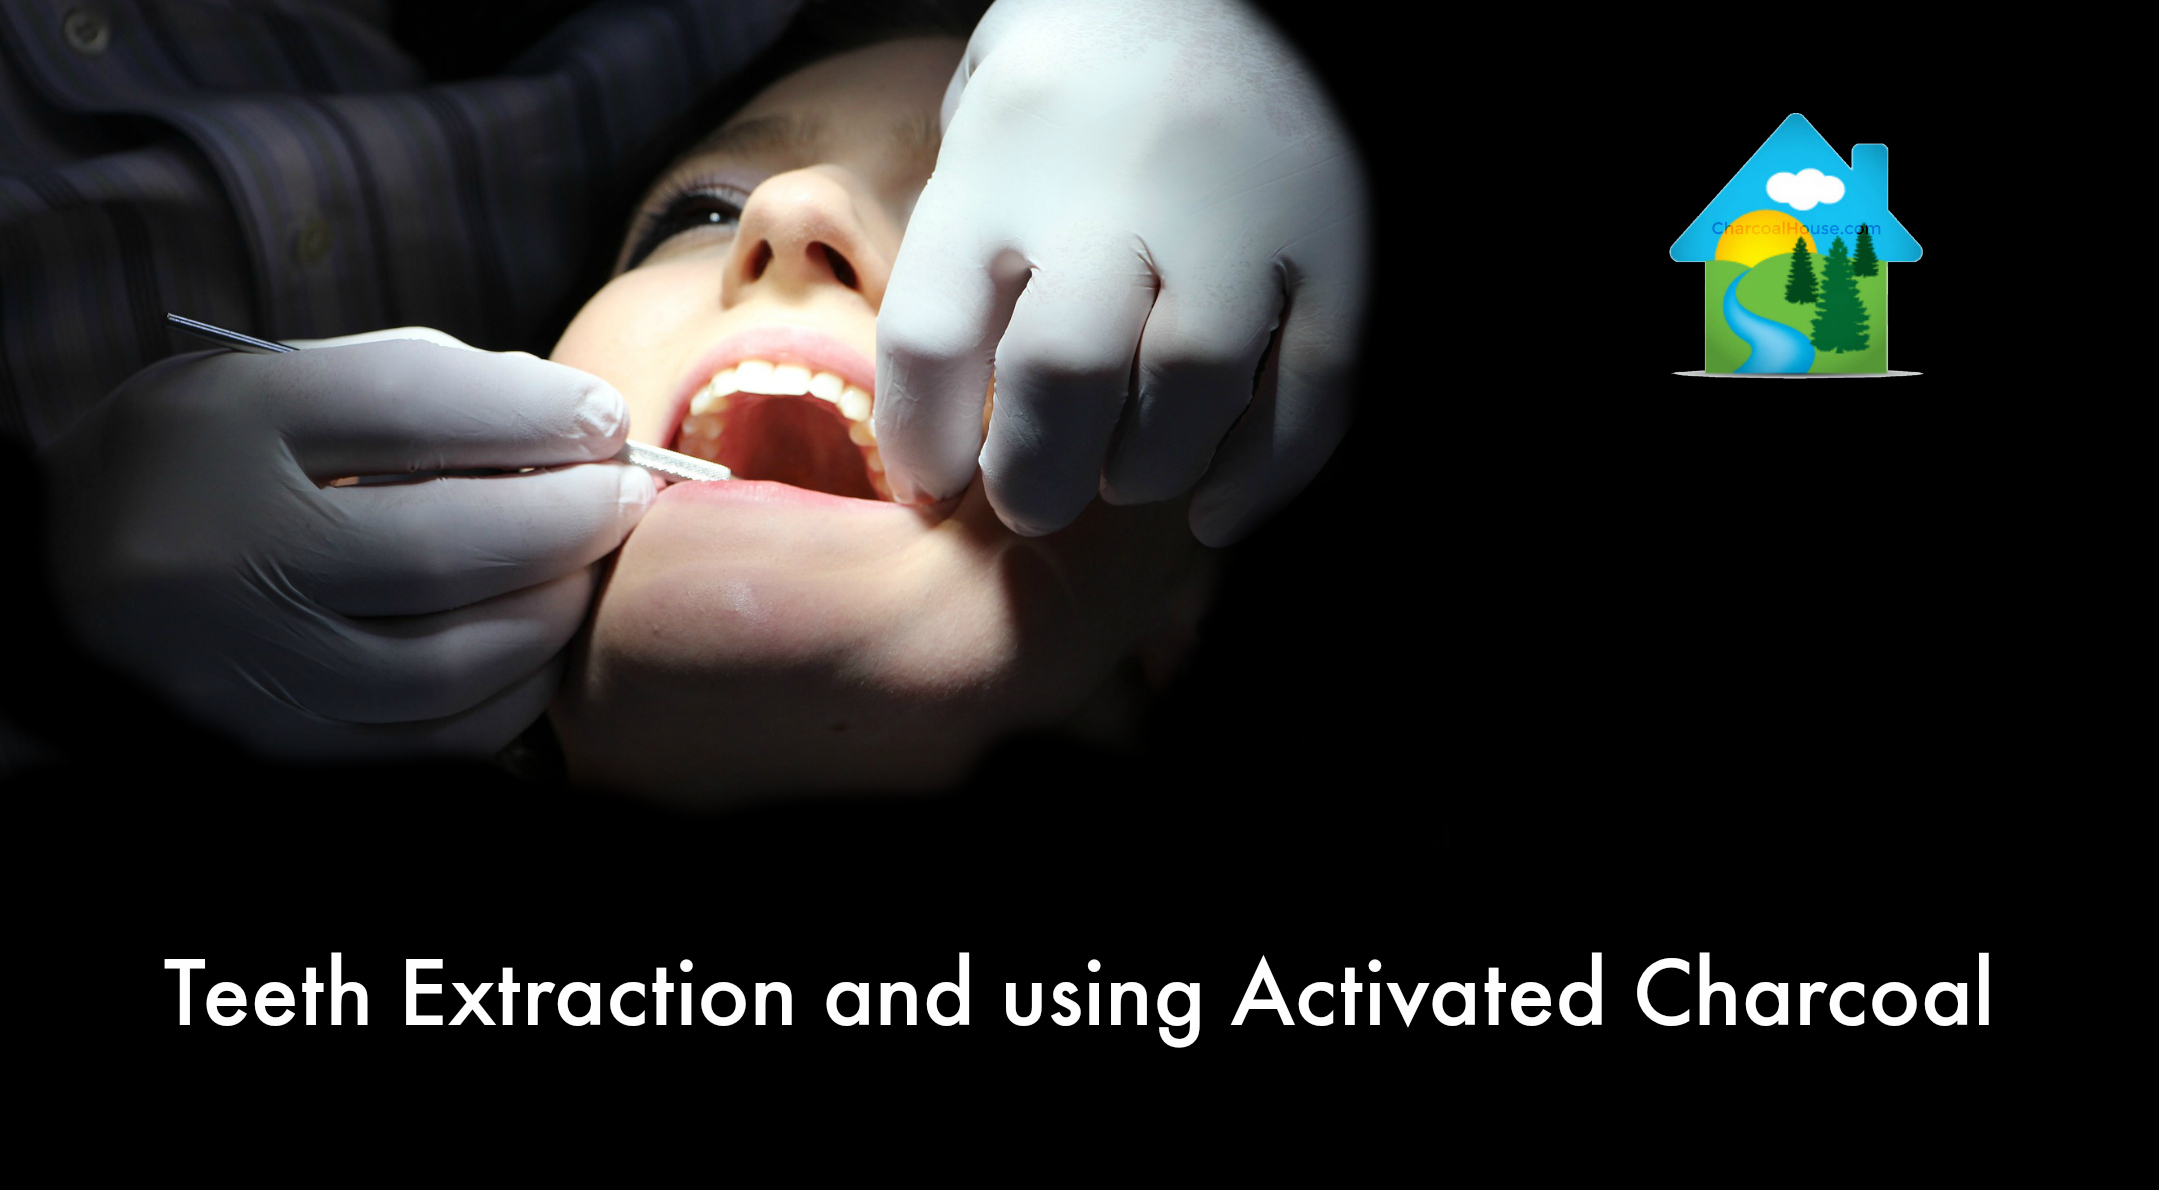 Blog post Teeth Extraction Using Activated Charcoal - Teeth Extraction and Using Activated Charcoal